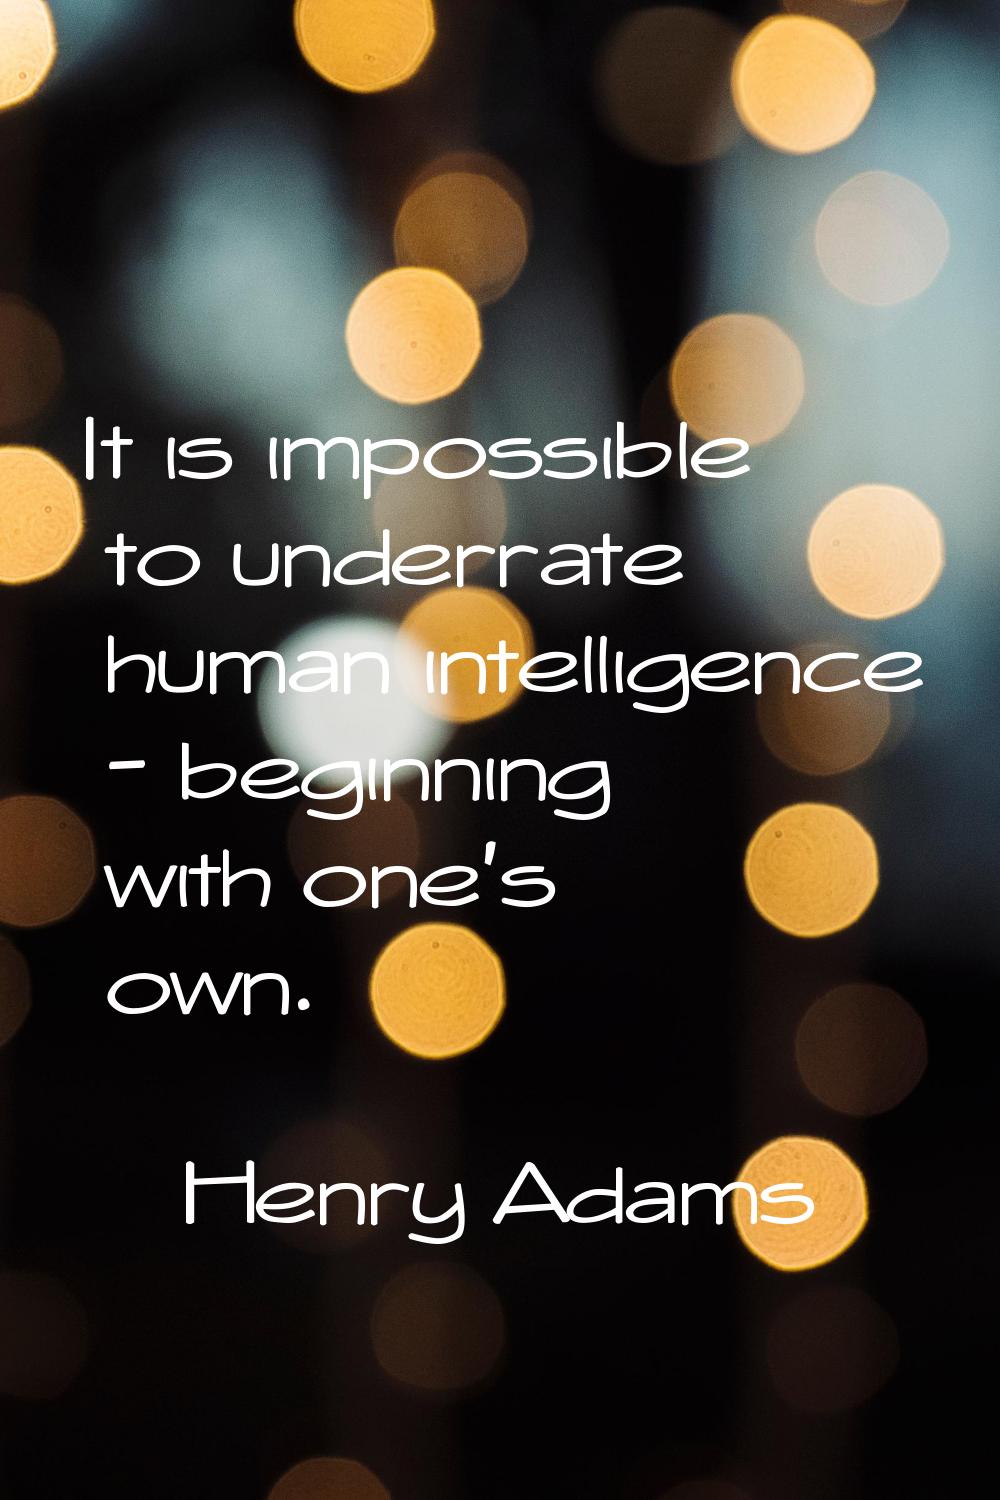 It is impossible to underrate human intelligence - beginning with one's own.